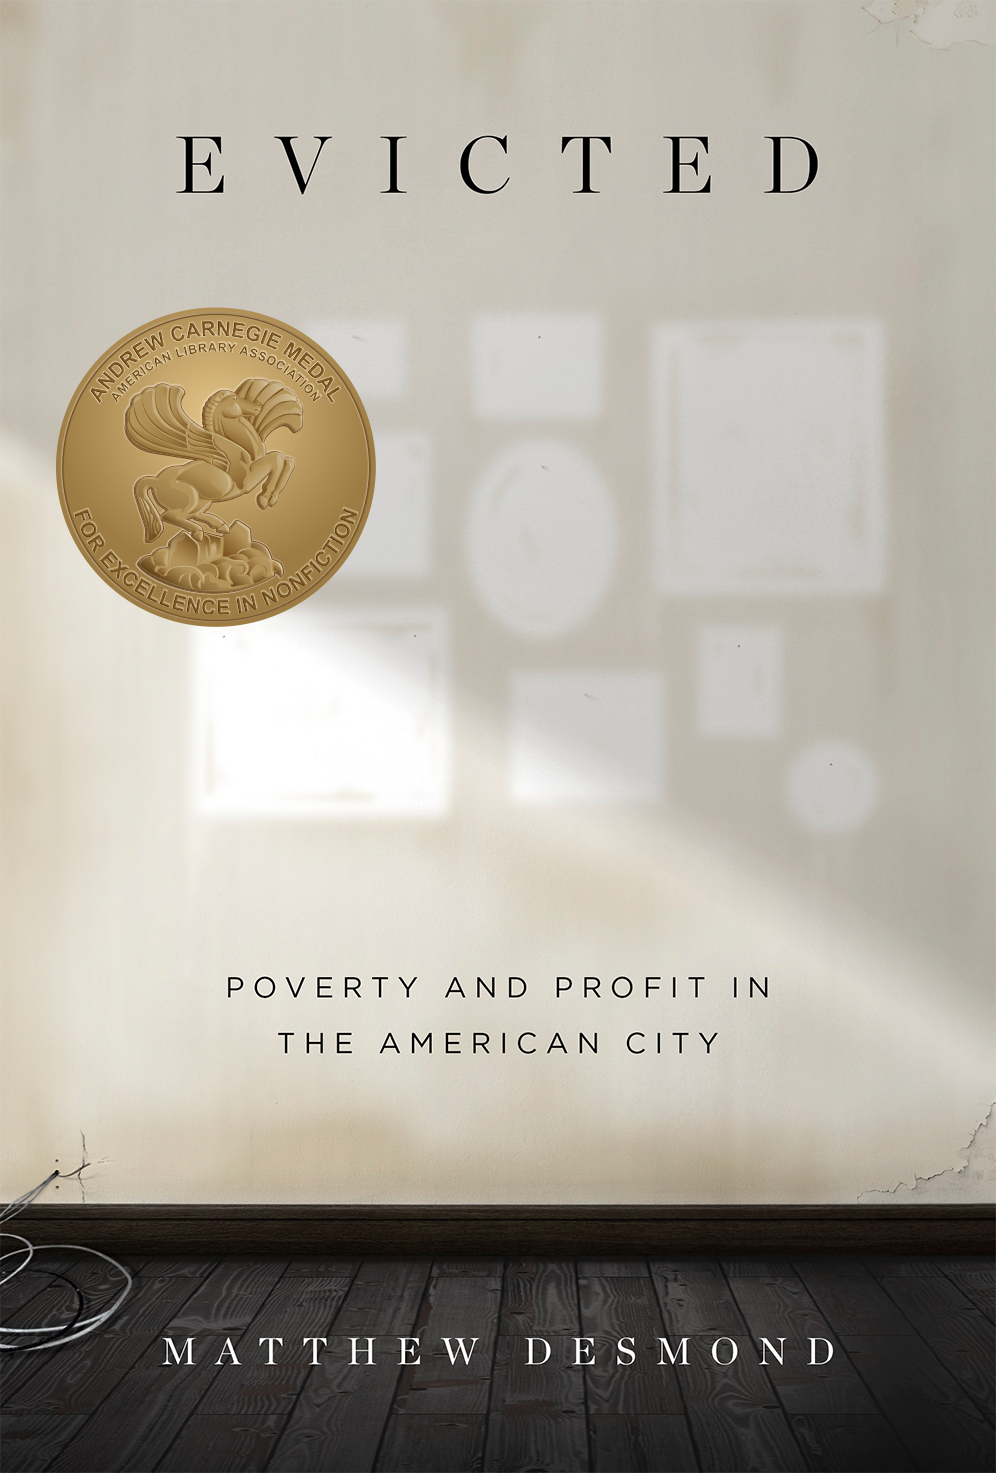 Cover of Evicted: poverty and profit in the American city by Matthew Desmond